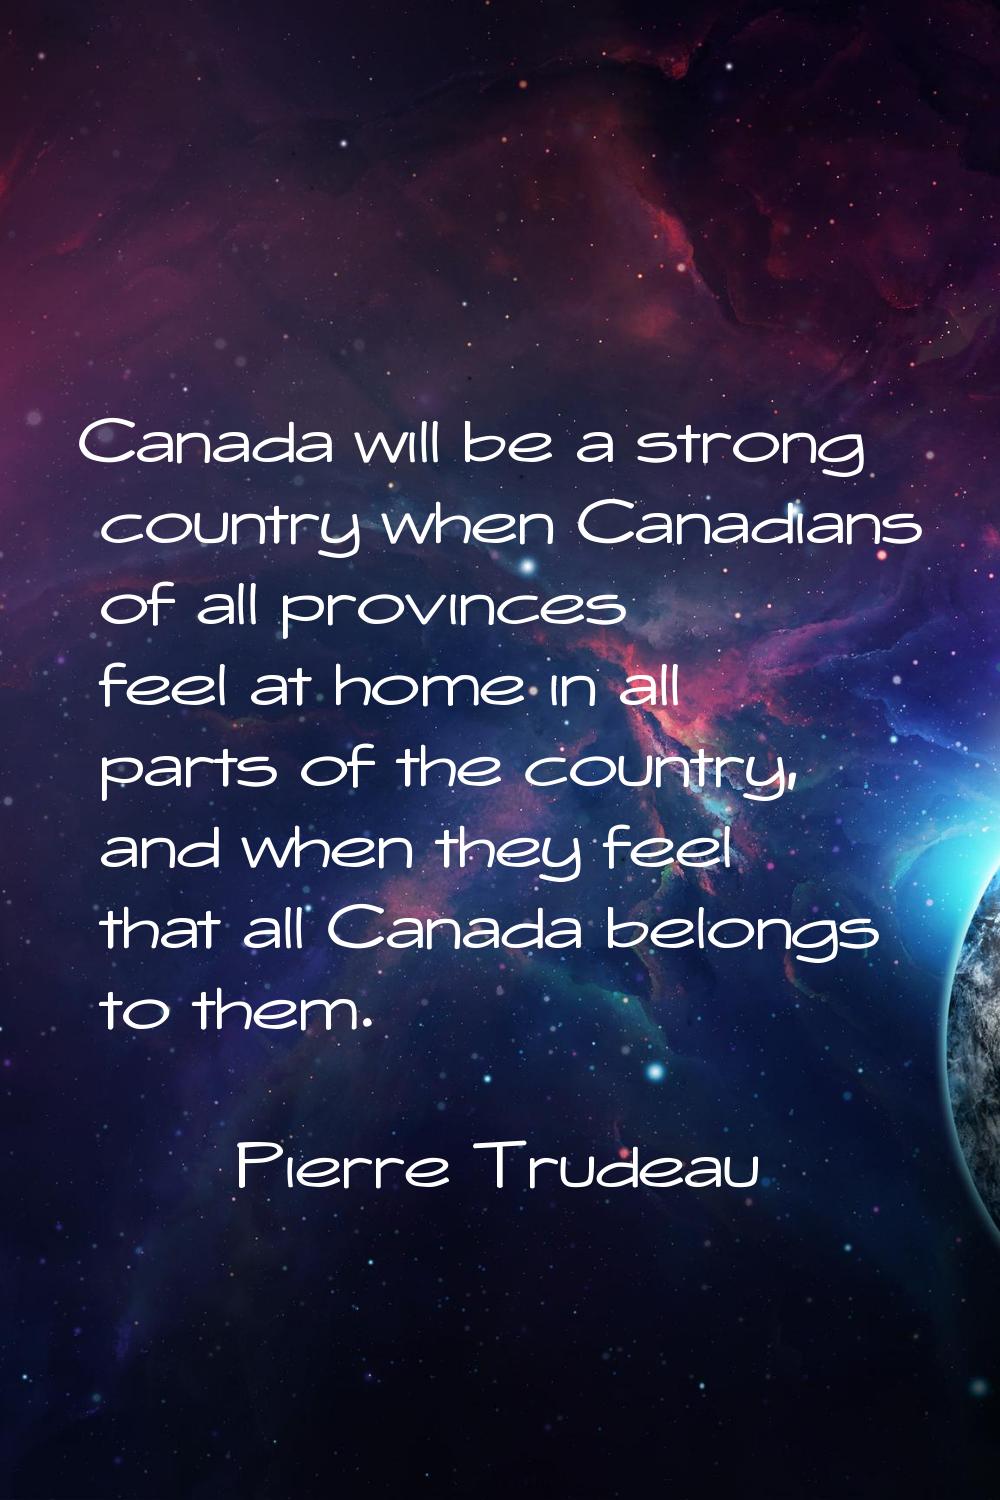 Canada will be a strong country when Canadians of all provinces feel at home in all parts of the co